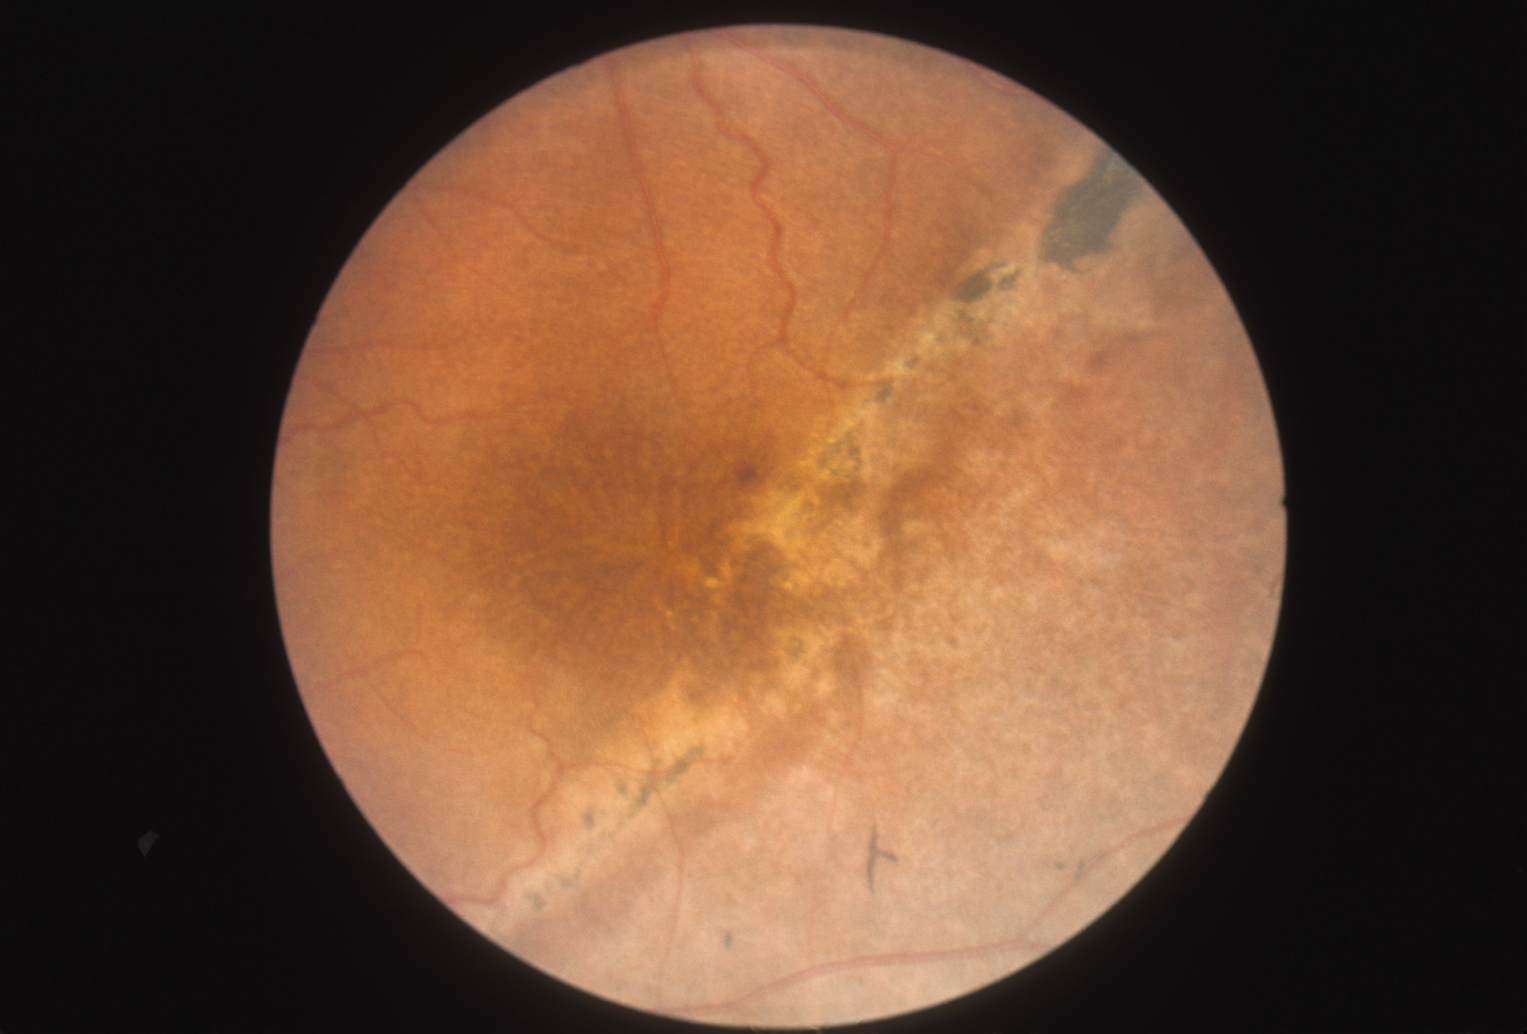 Stellate macula with retinoschisis demarcation line